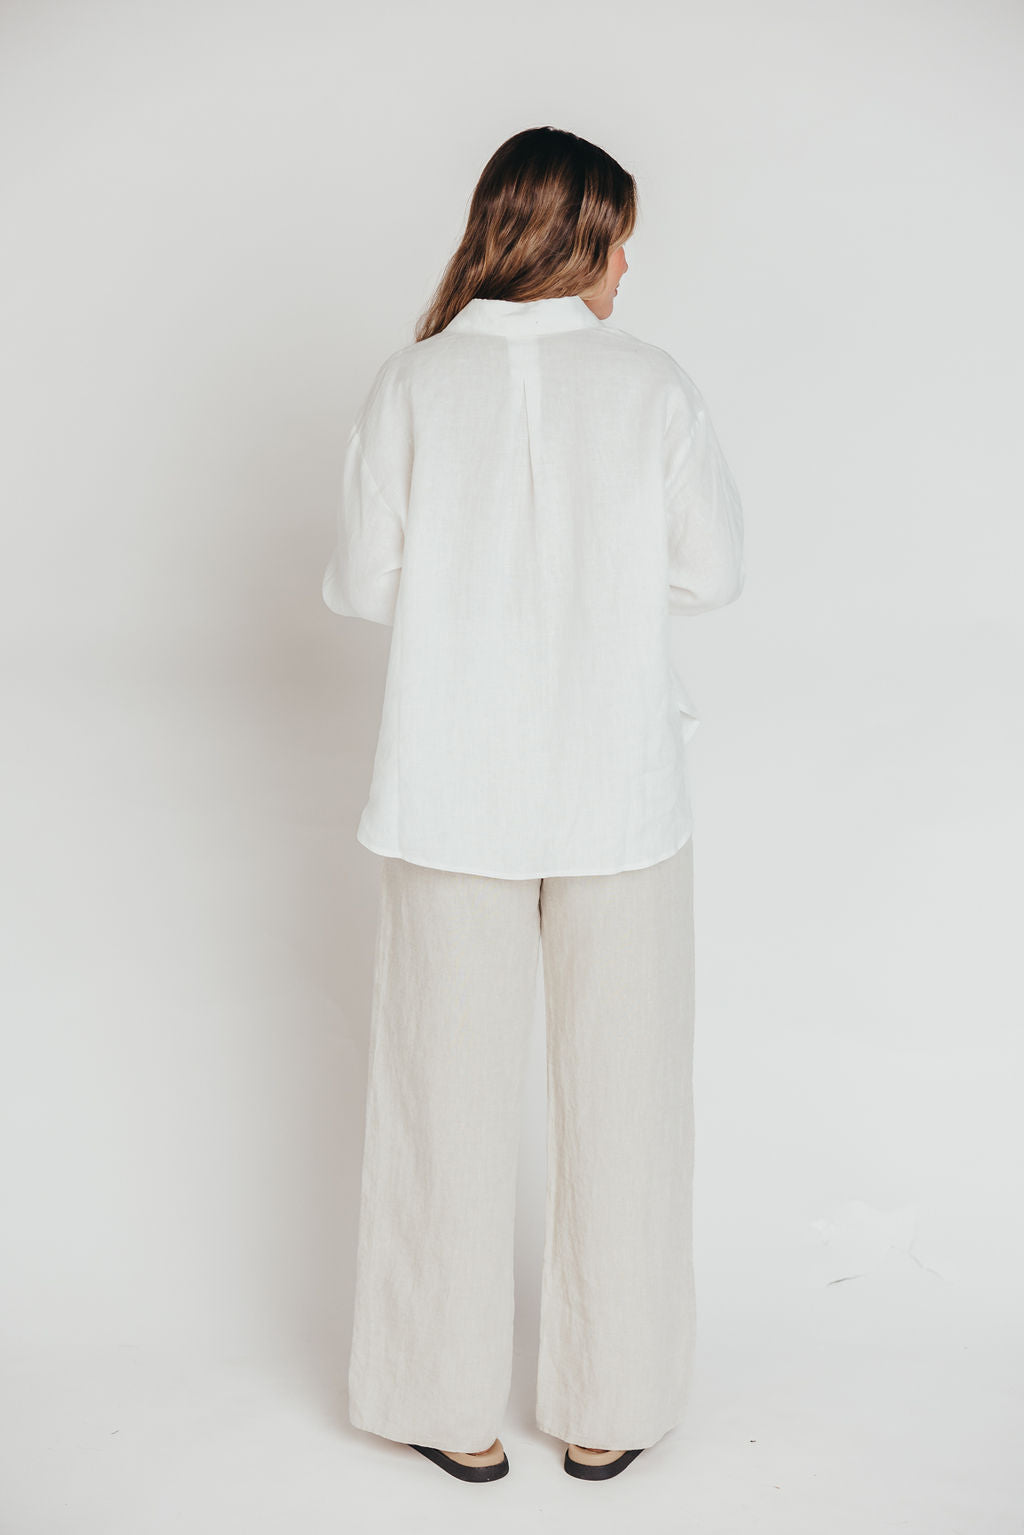 The Evelyn 100% Linen Top in White